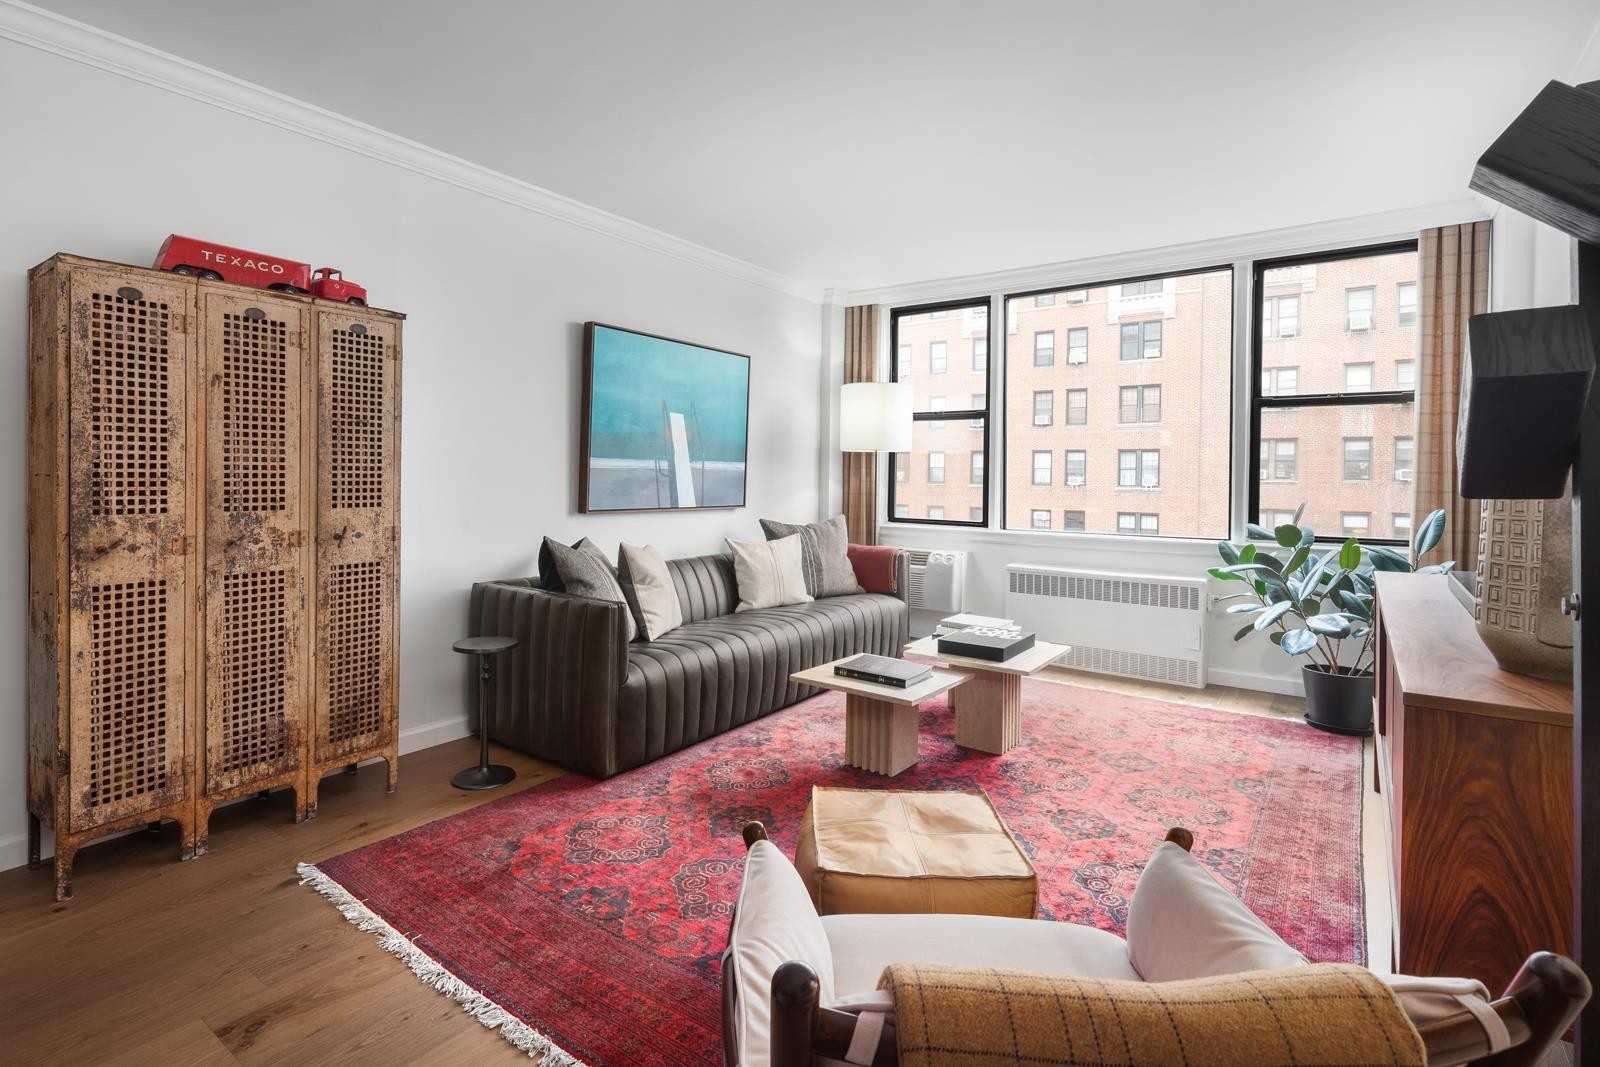 Co-op Properties for Sale at The Gloucester, 200 W 79TH ST, 11J Upper West Side, New York, NY 10024